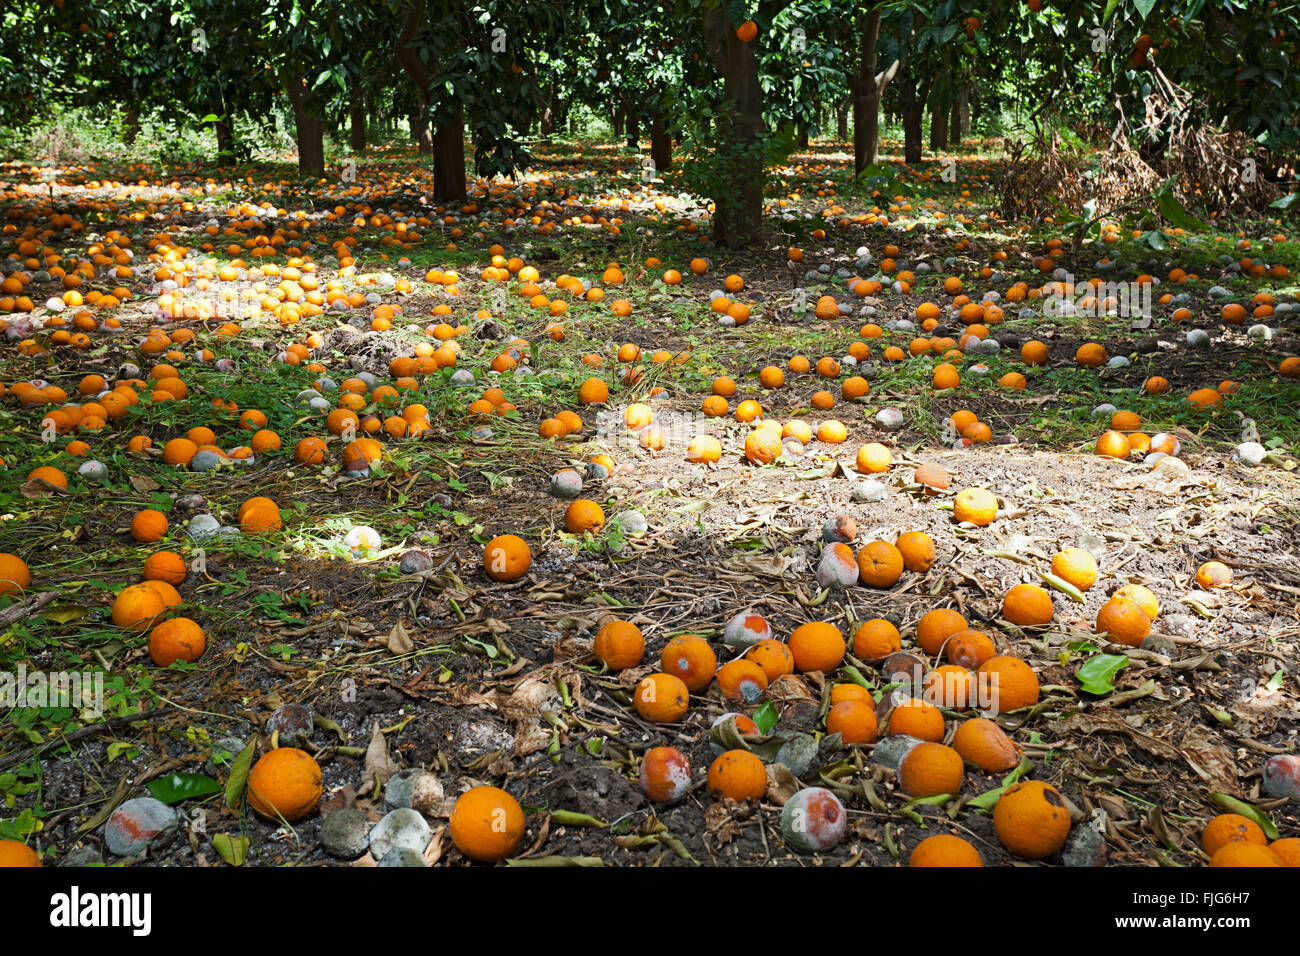 Fallen, rotten oranges beneath trees in an orange orchard, plantation in Sicily, Italy Stock Photo